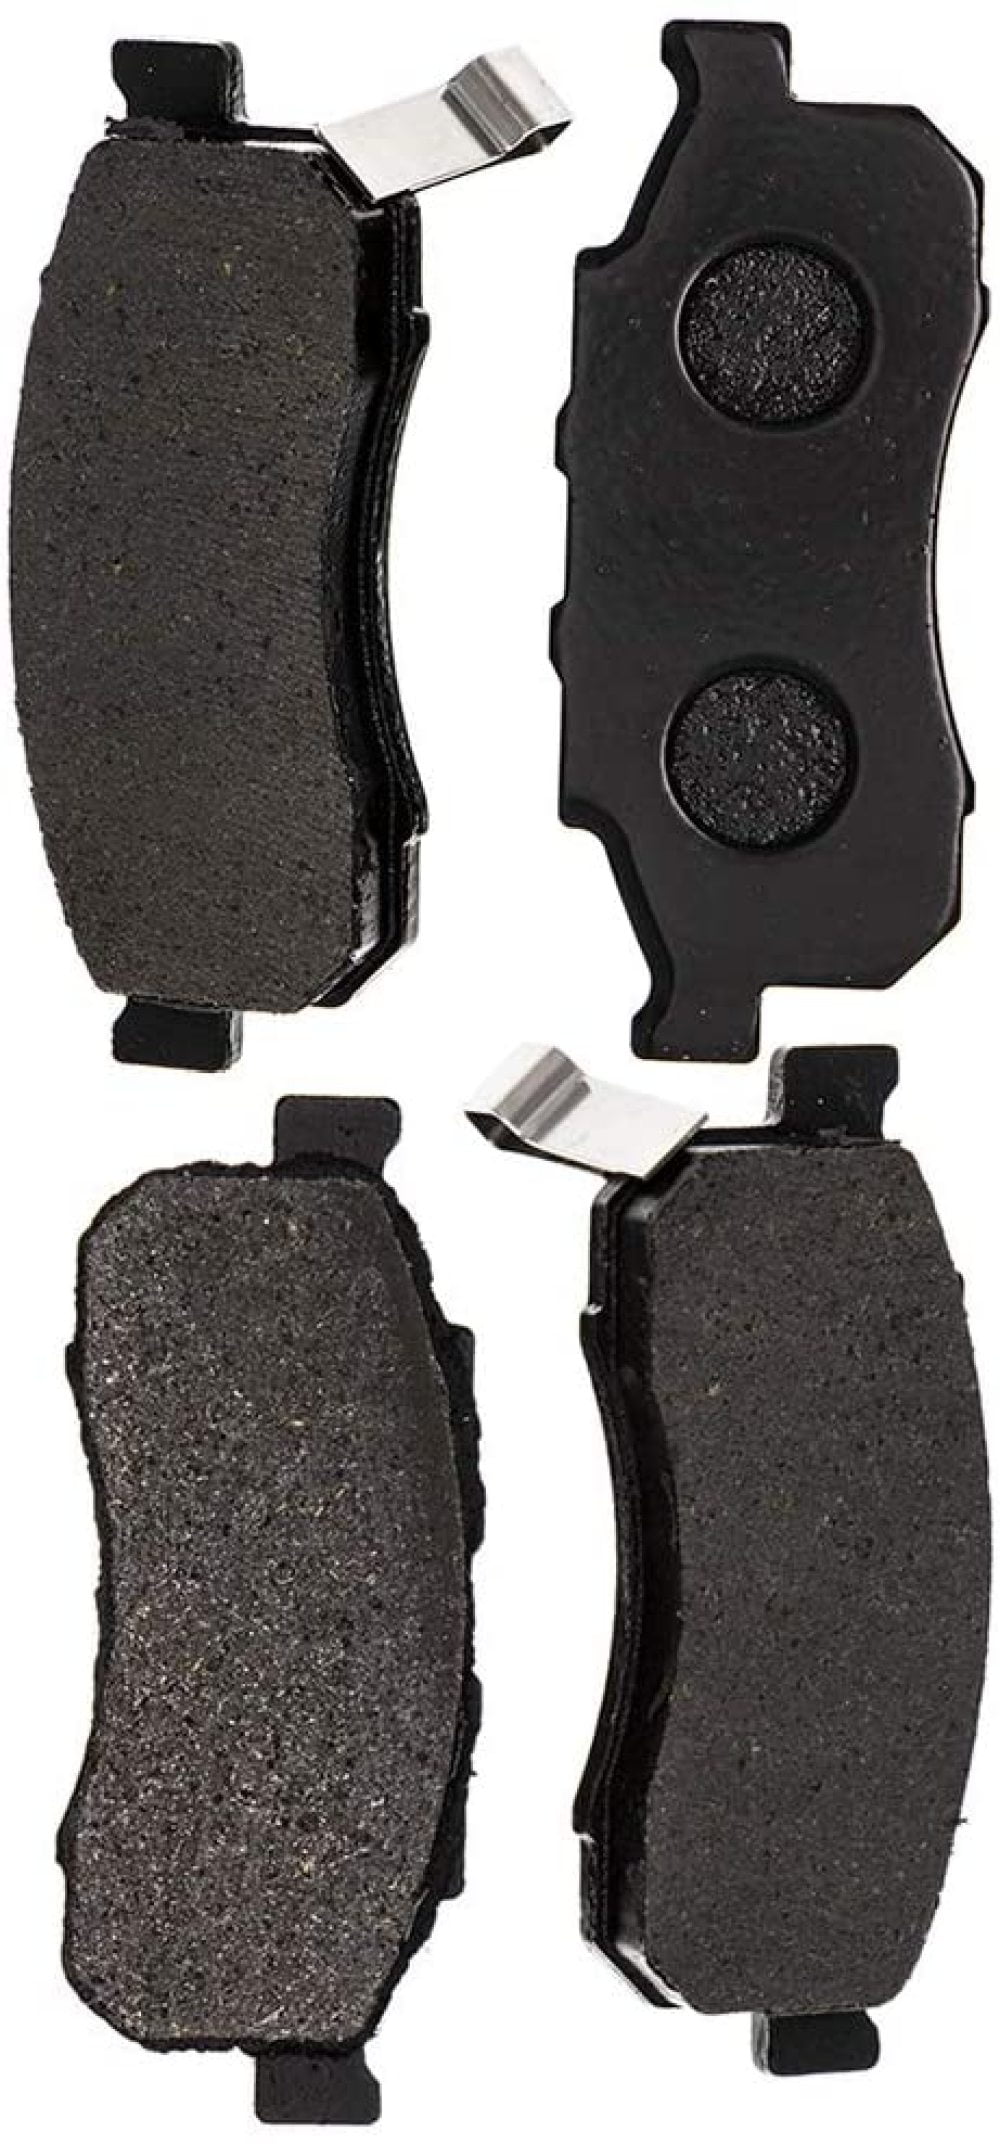 NICHE Brake Pad Kit For Honda Pioneer 700 500 Replaces 06451-HL1-A01 06452-HL1-A01 06452-HL3-A00 Front Semi-Metallic 